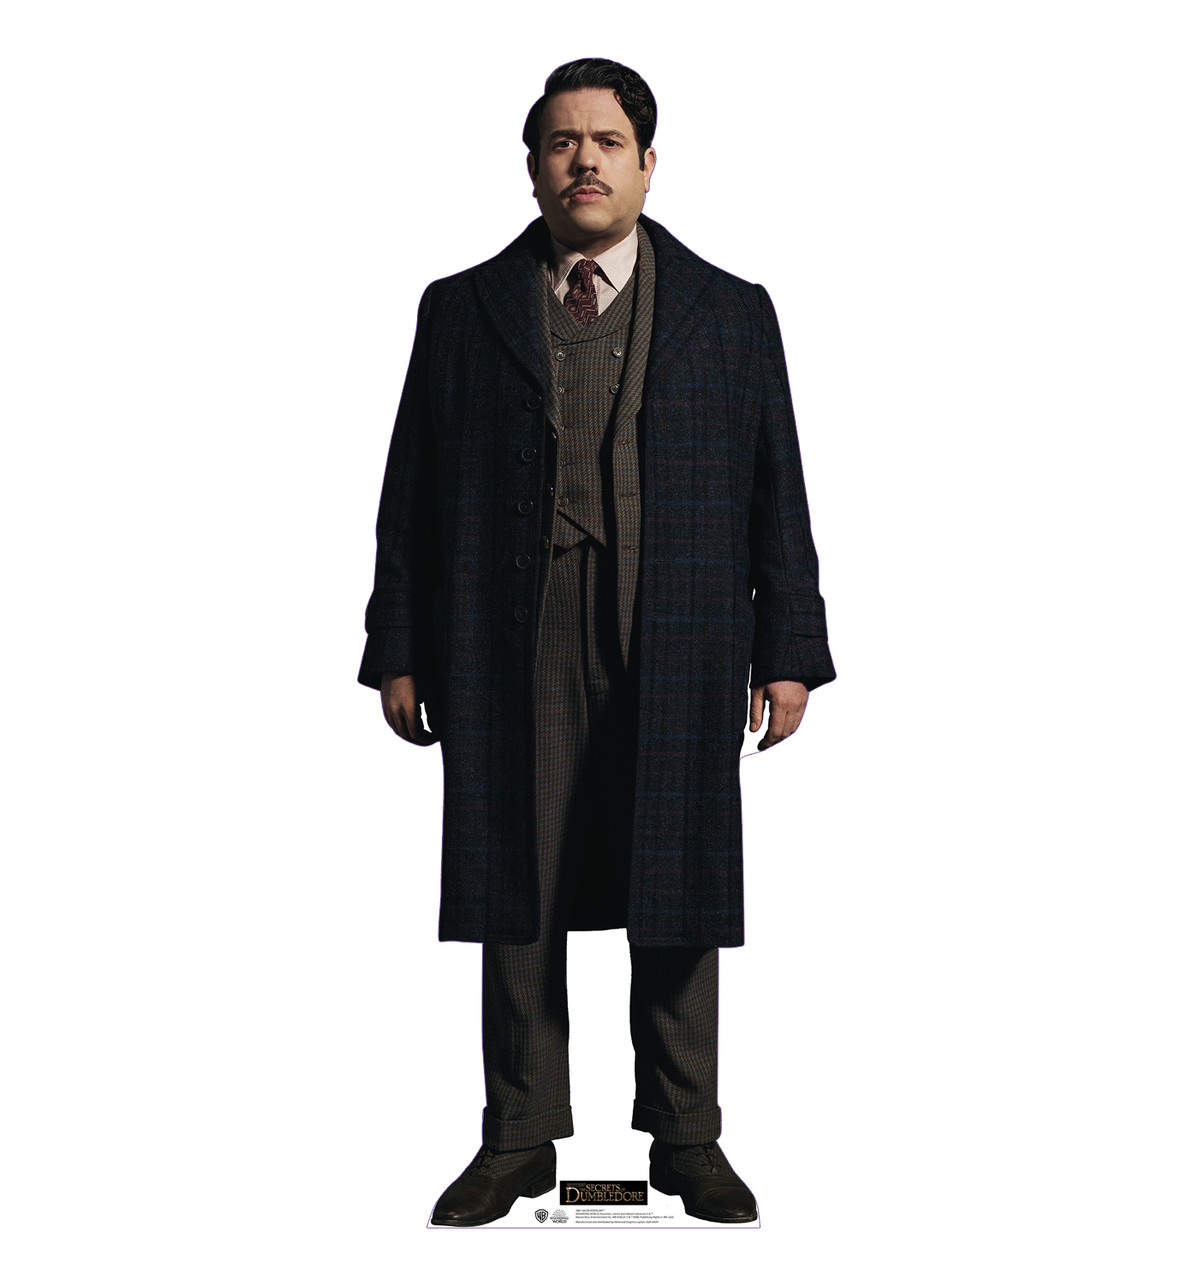 Life-size cardboard standee of Jacob Kowalski from Fantastic Beasts The Secrets of Dumbledore.